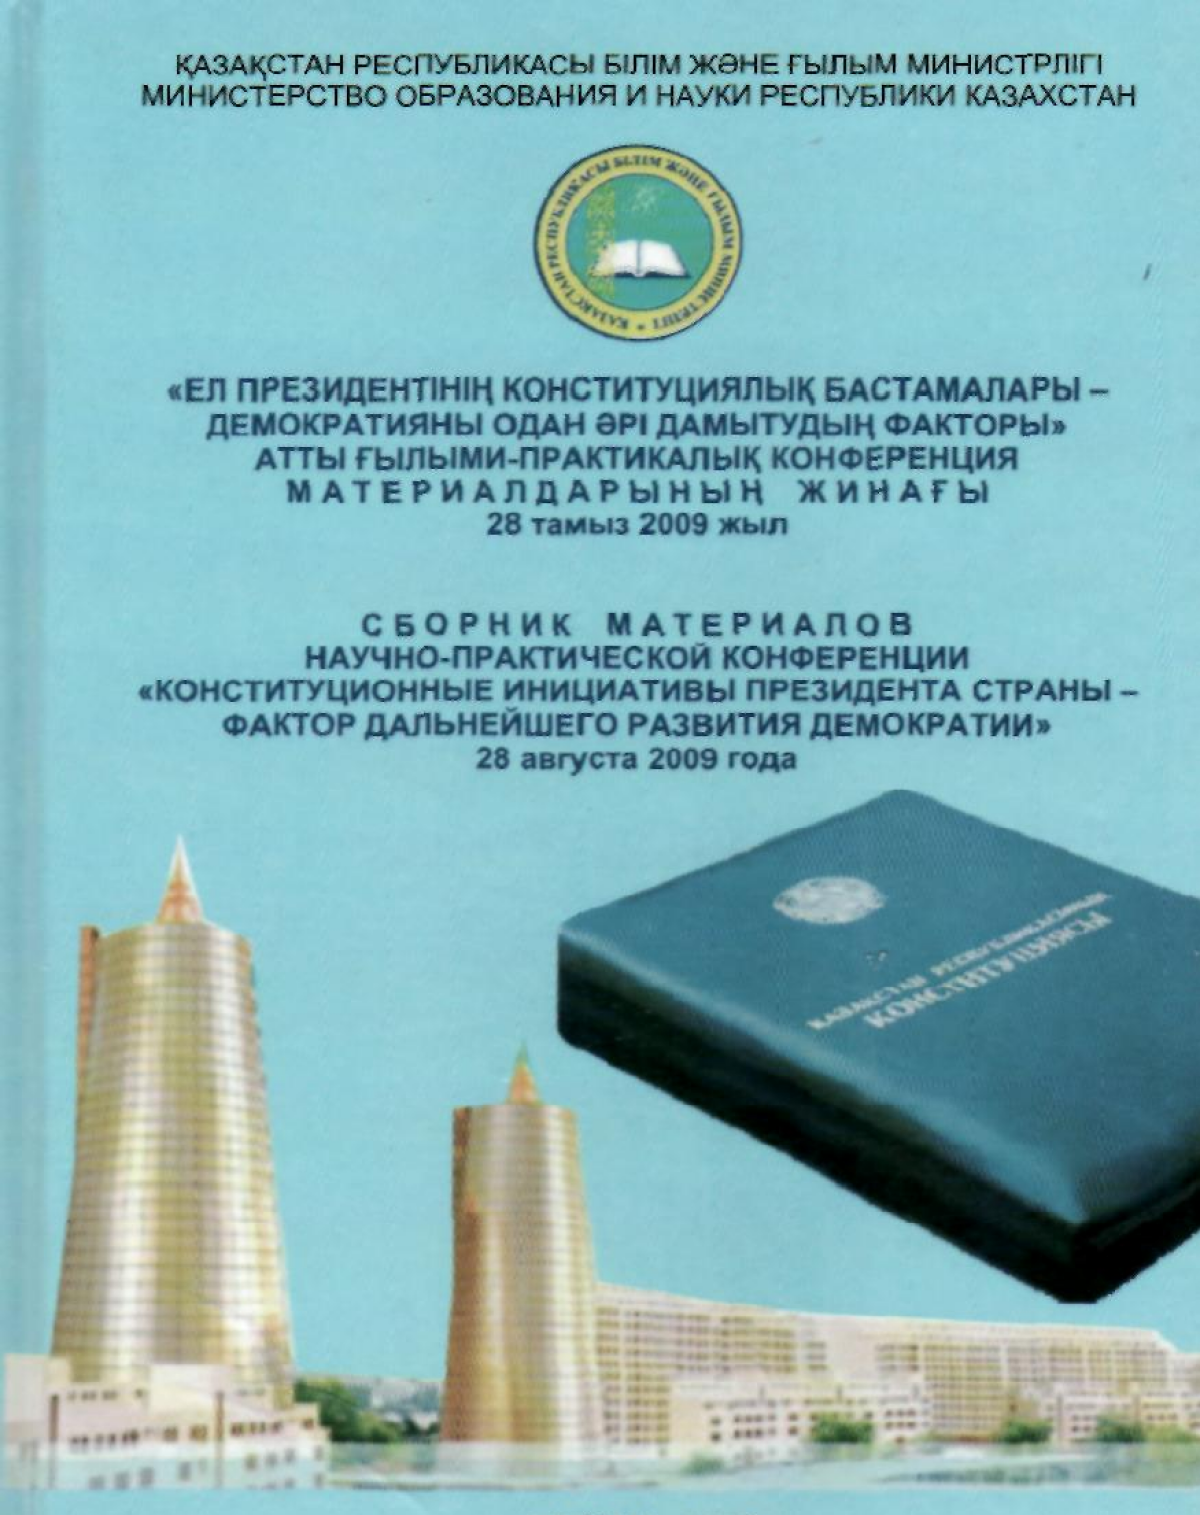 On some problems in the study of the history of independent Kazakhstan - e-history.kz